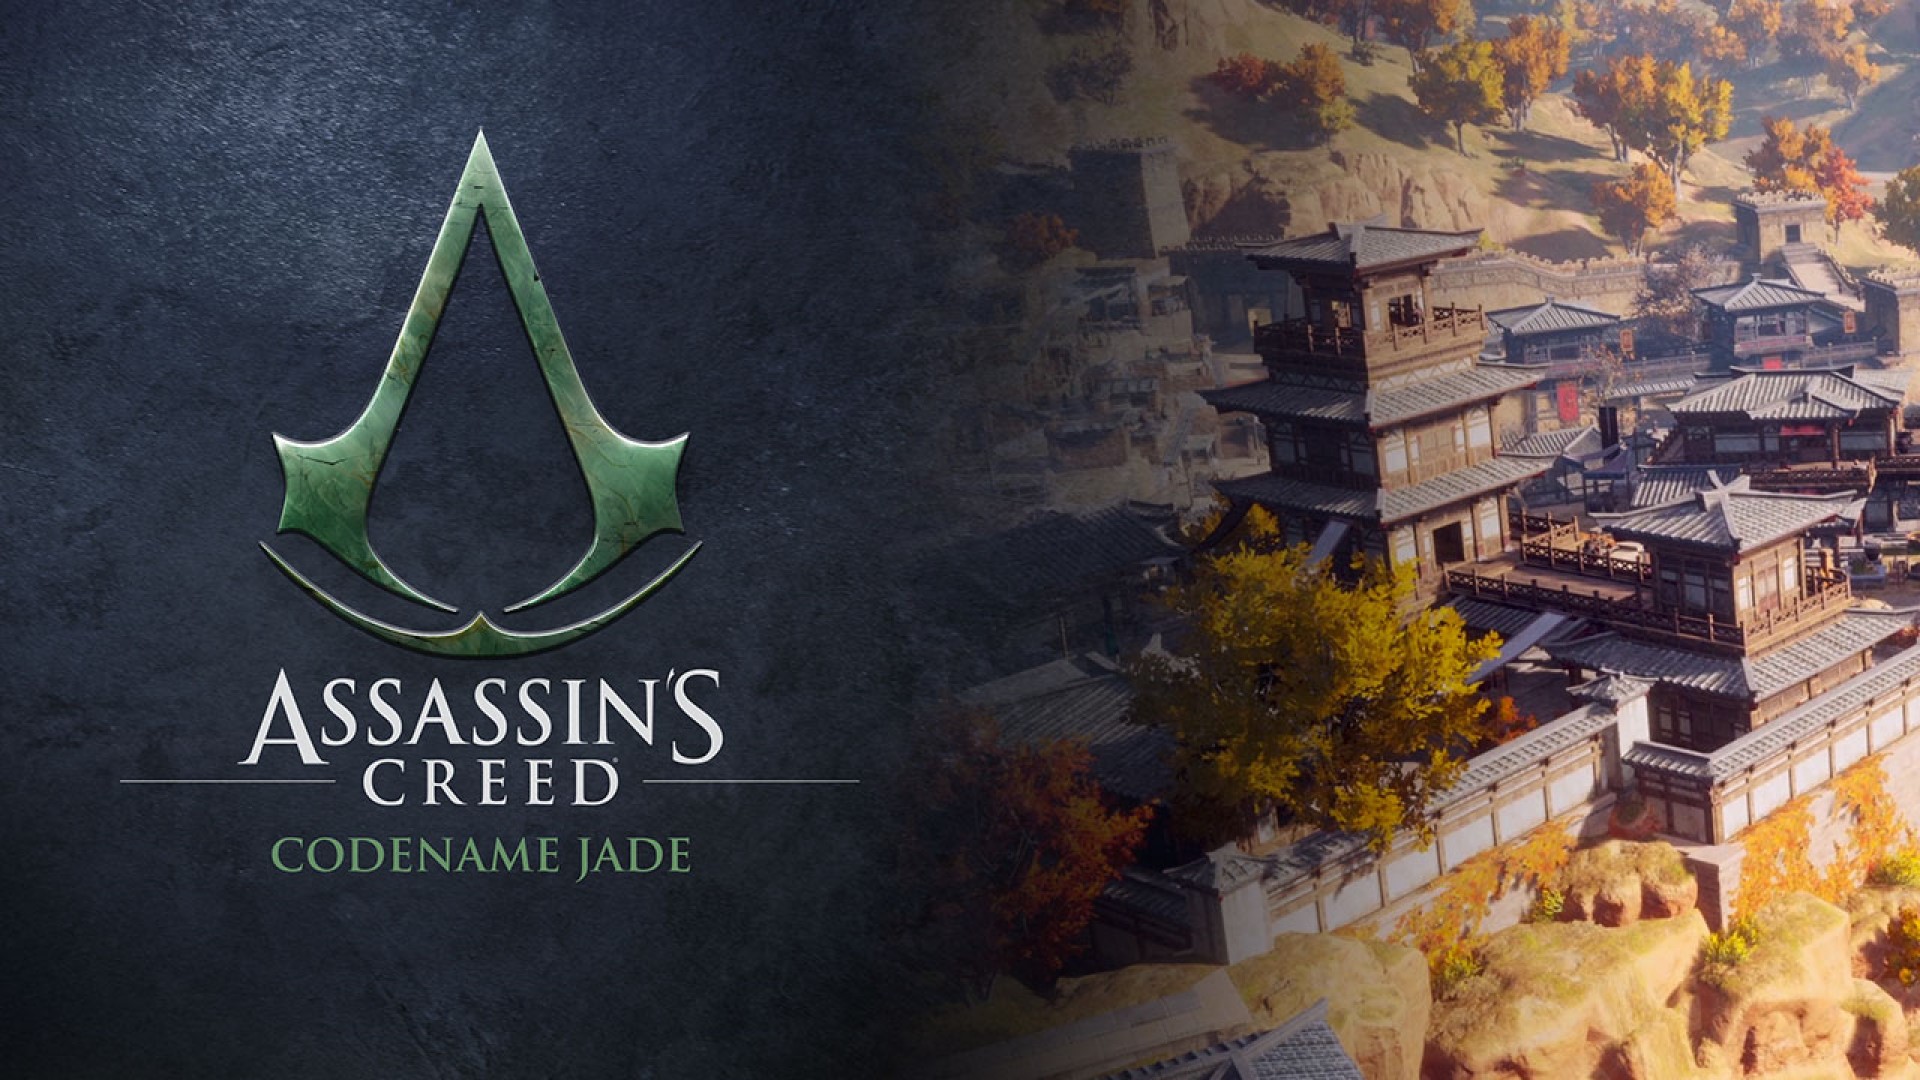 Assassin’s Creed Codename Jade Beta Registrations Are Now Live